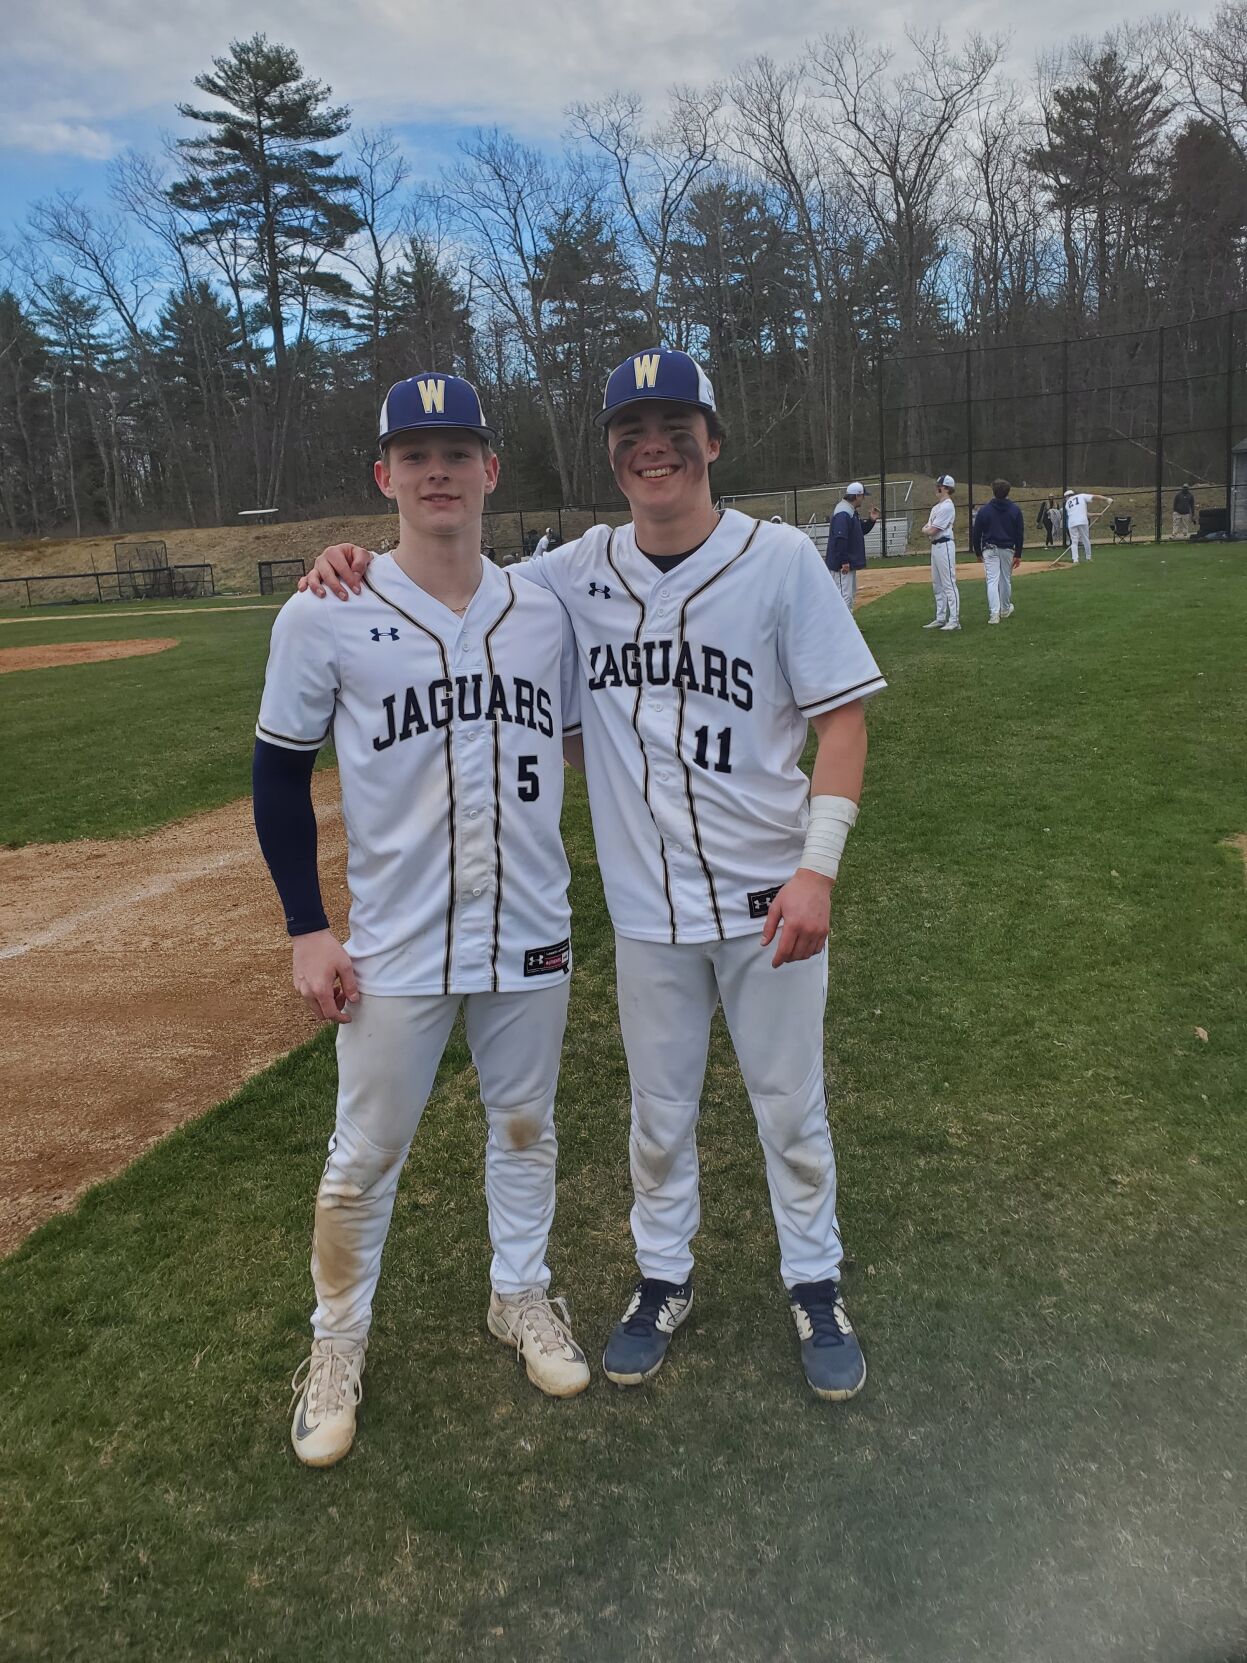 Windham vs. Dover: Arinello’s Walk-Off Hit Seals 1-0 Victory in Classic Pitcher’s Duel